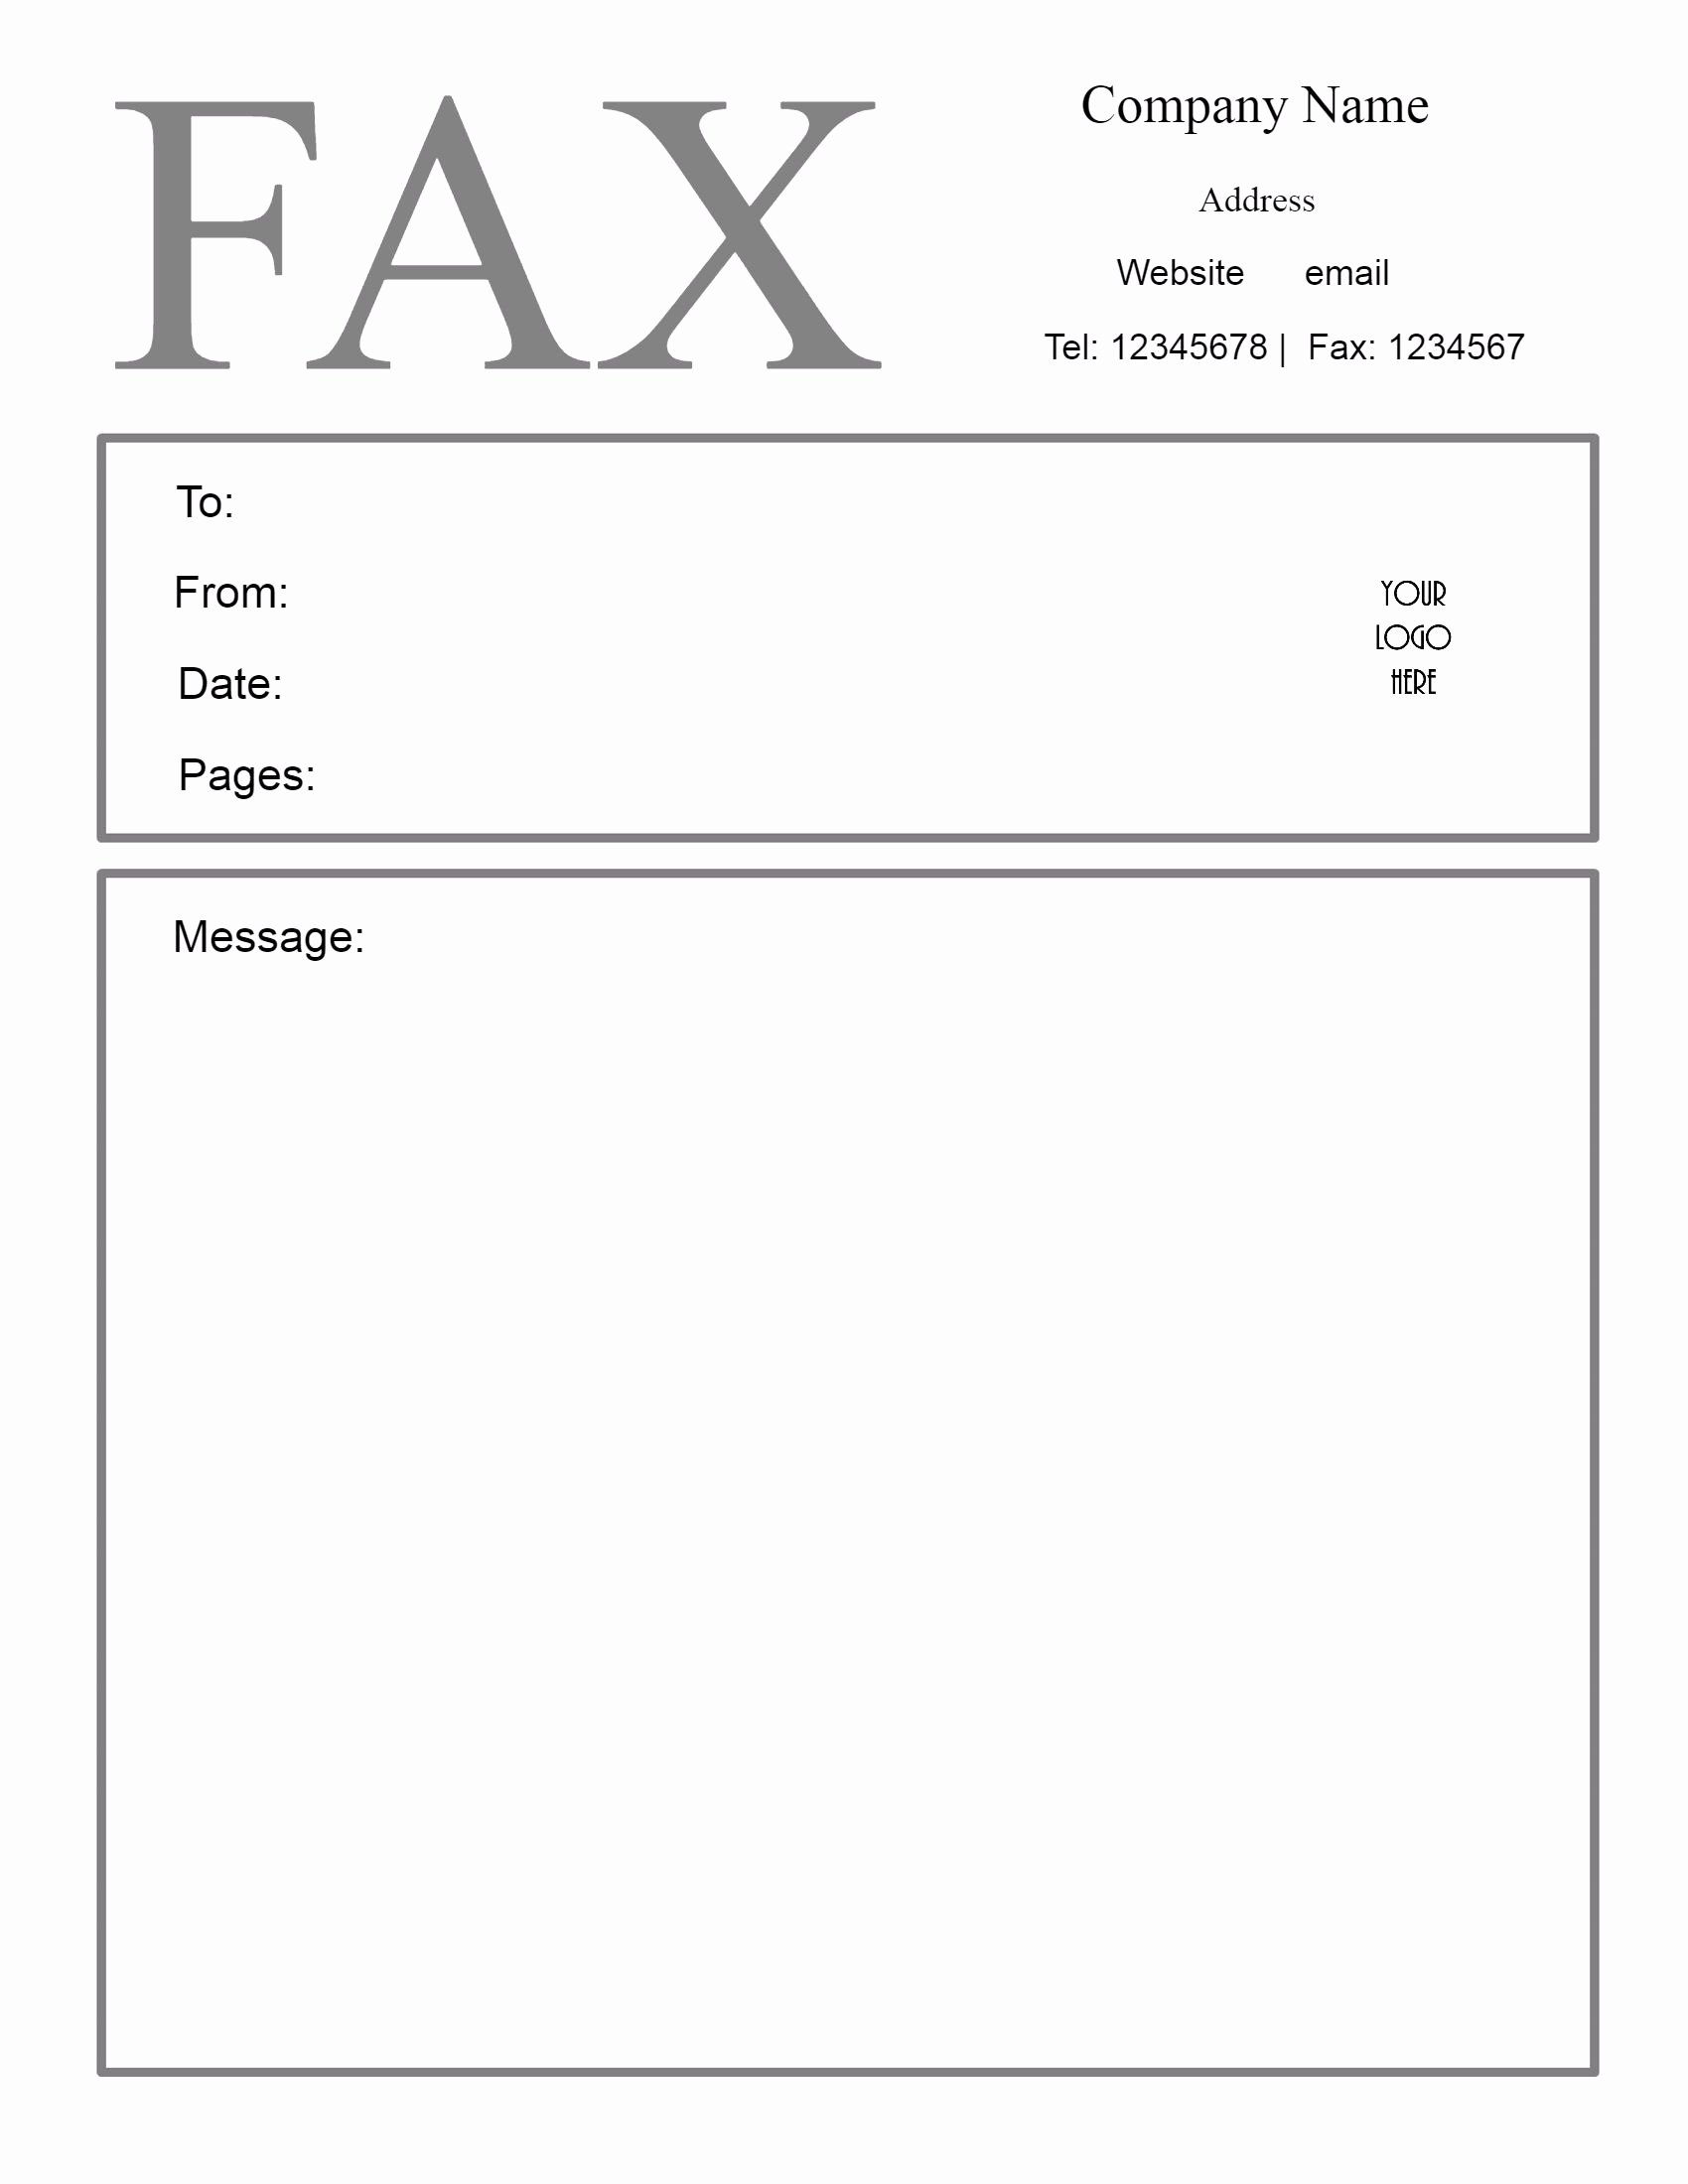 Free Fax Cover Page Template Fresh Free Fax Cover Sheet Template